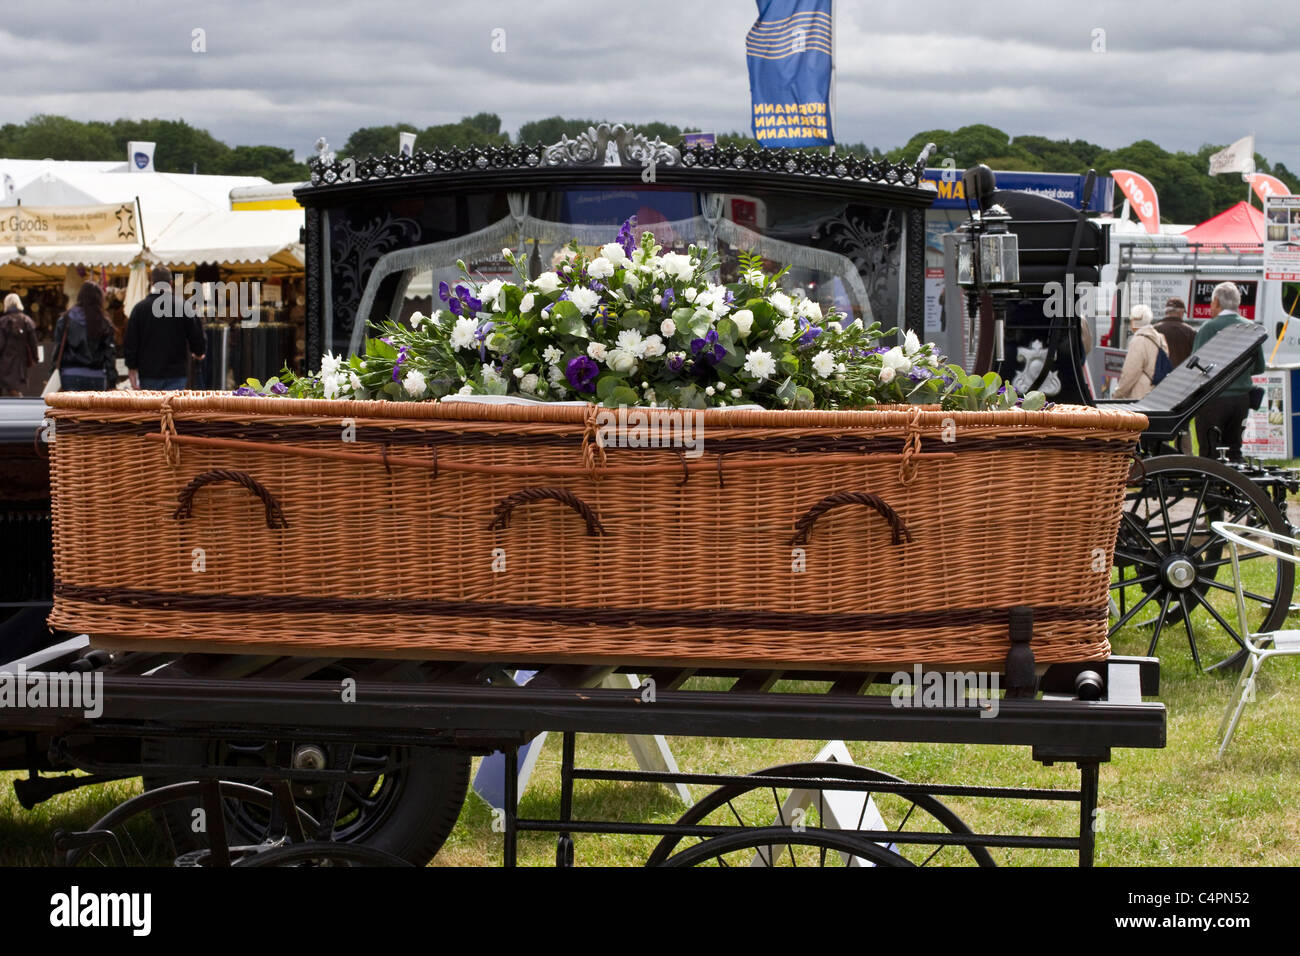 Funeral Directors, wicker, wickerwork, plaited or woven twigs or osiers casket, case, casket, cemetery, closed coffin, dead, death, eco, ecological, eternity, ethical, funeral, grave, green burial. Stands & Exhibits at the Cheshire Game & Country Fair Show, Knutsford, UK Stock Photo